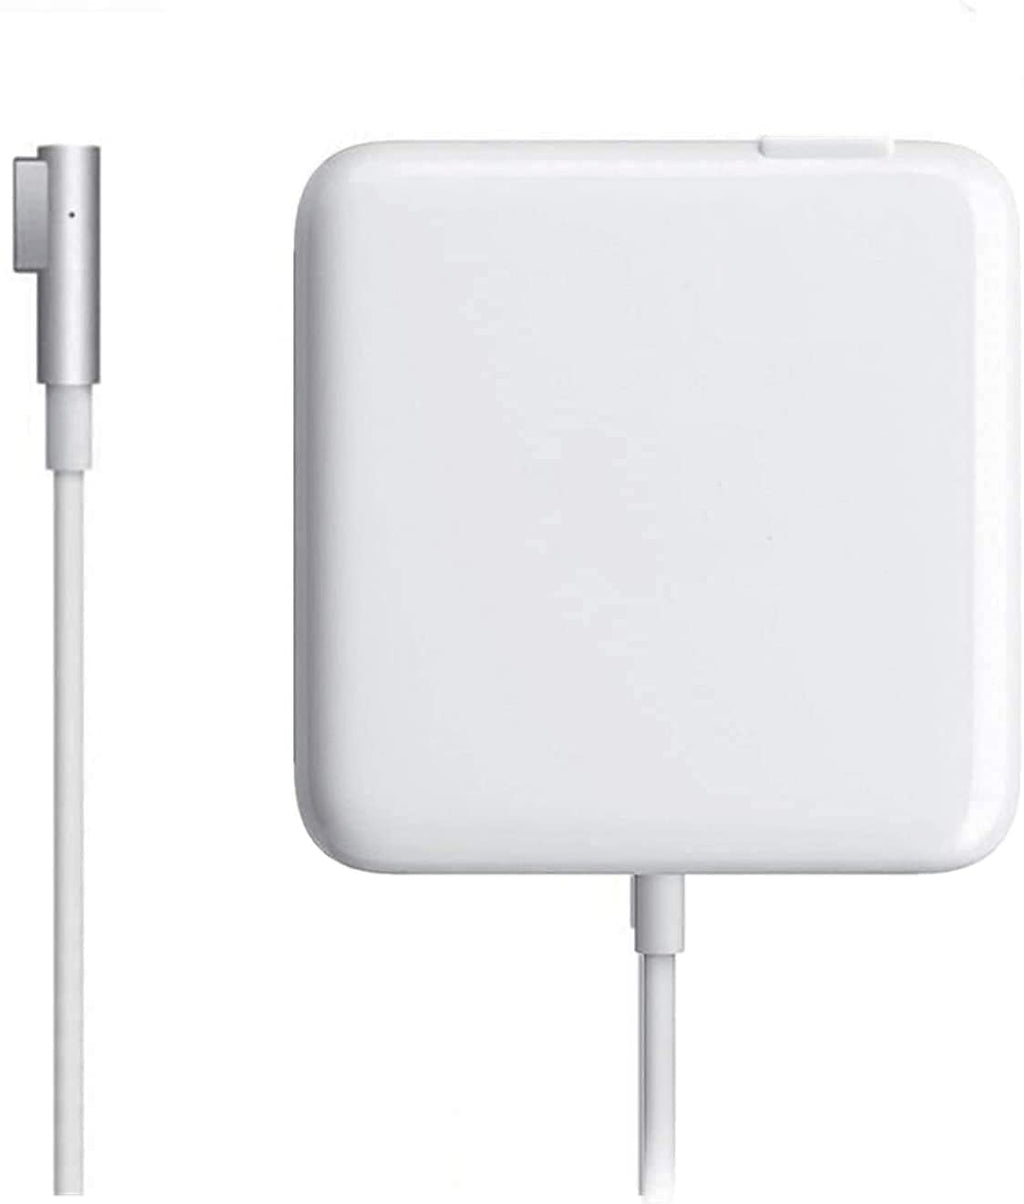  [AUSTRALIA] - Mac Book Pro Charger,60W Power Adapter L-Tip Magnetic Connector Charger and Compatible with Mac Book Pro 13 Inch Before Mid 2012,Fast Charger for Old Mac Book Pro